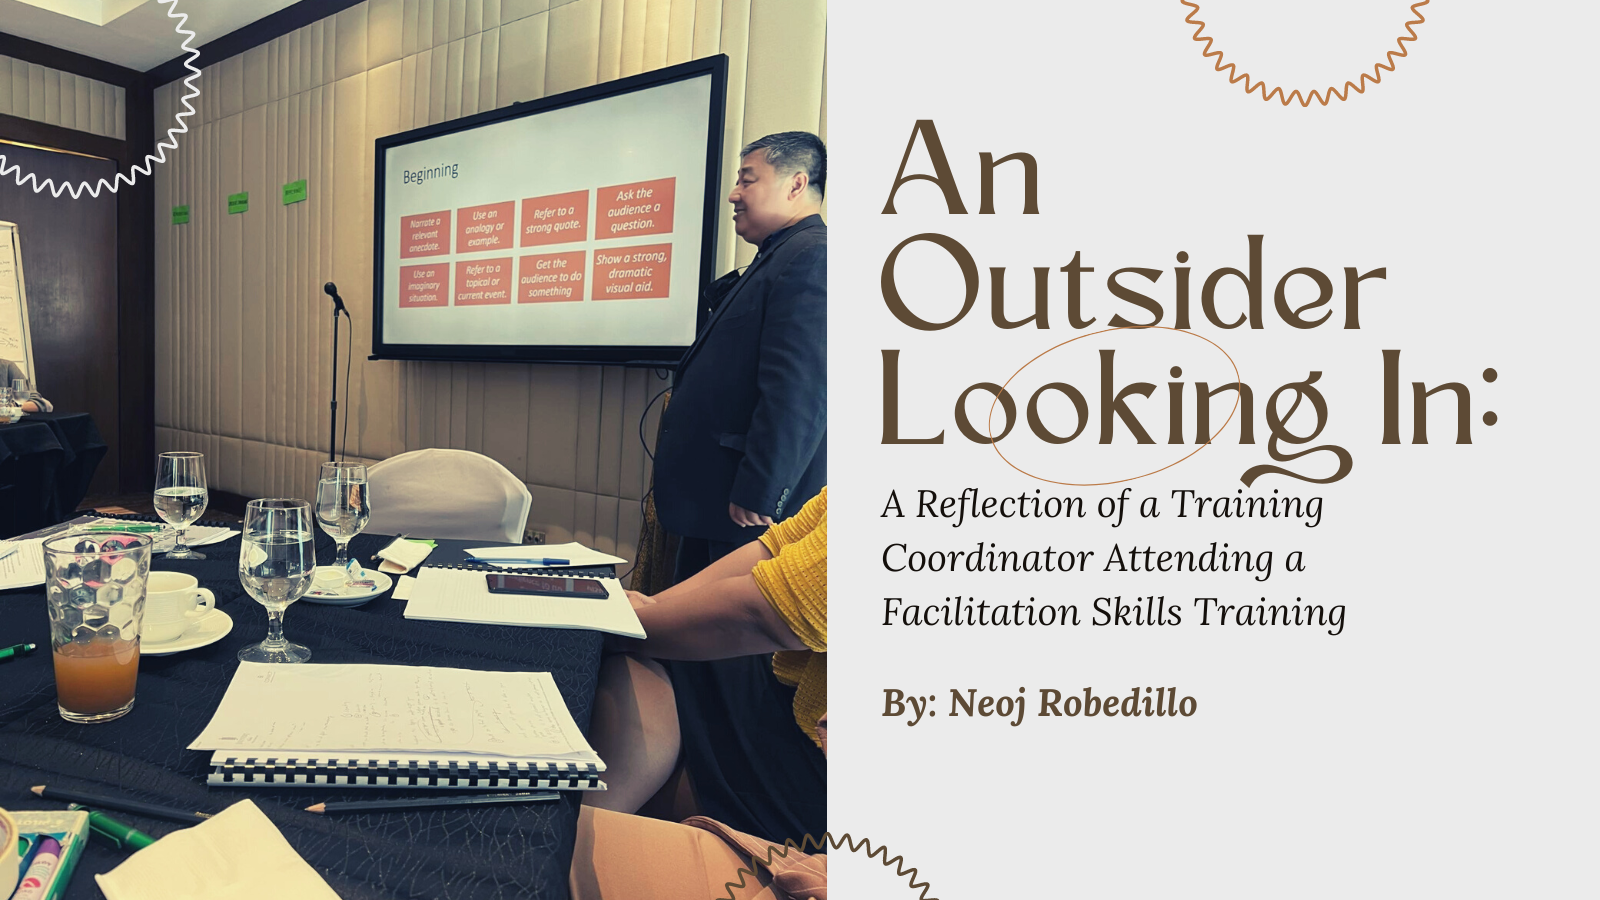 An Outsider Looking In: A Reflection of a Training Coordinator Attending a Facilitation Skills Training